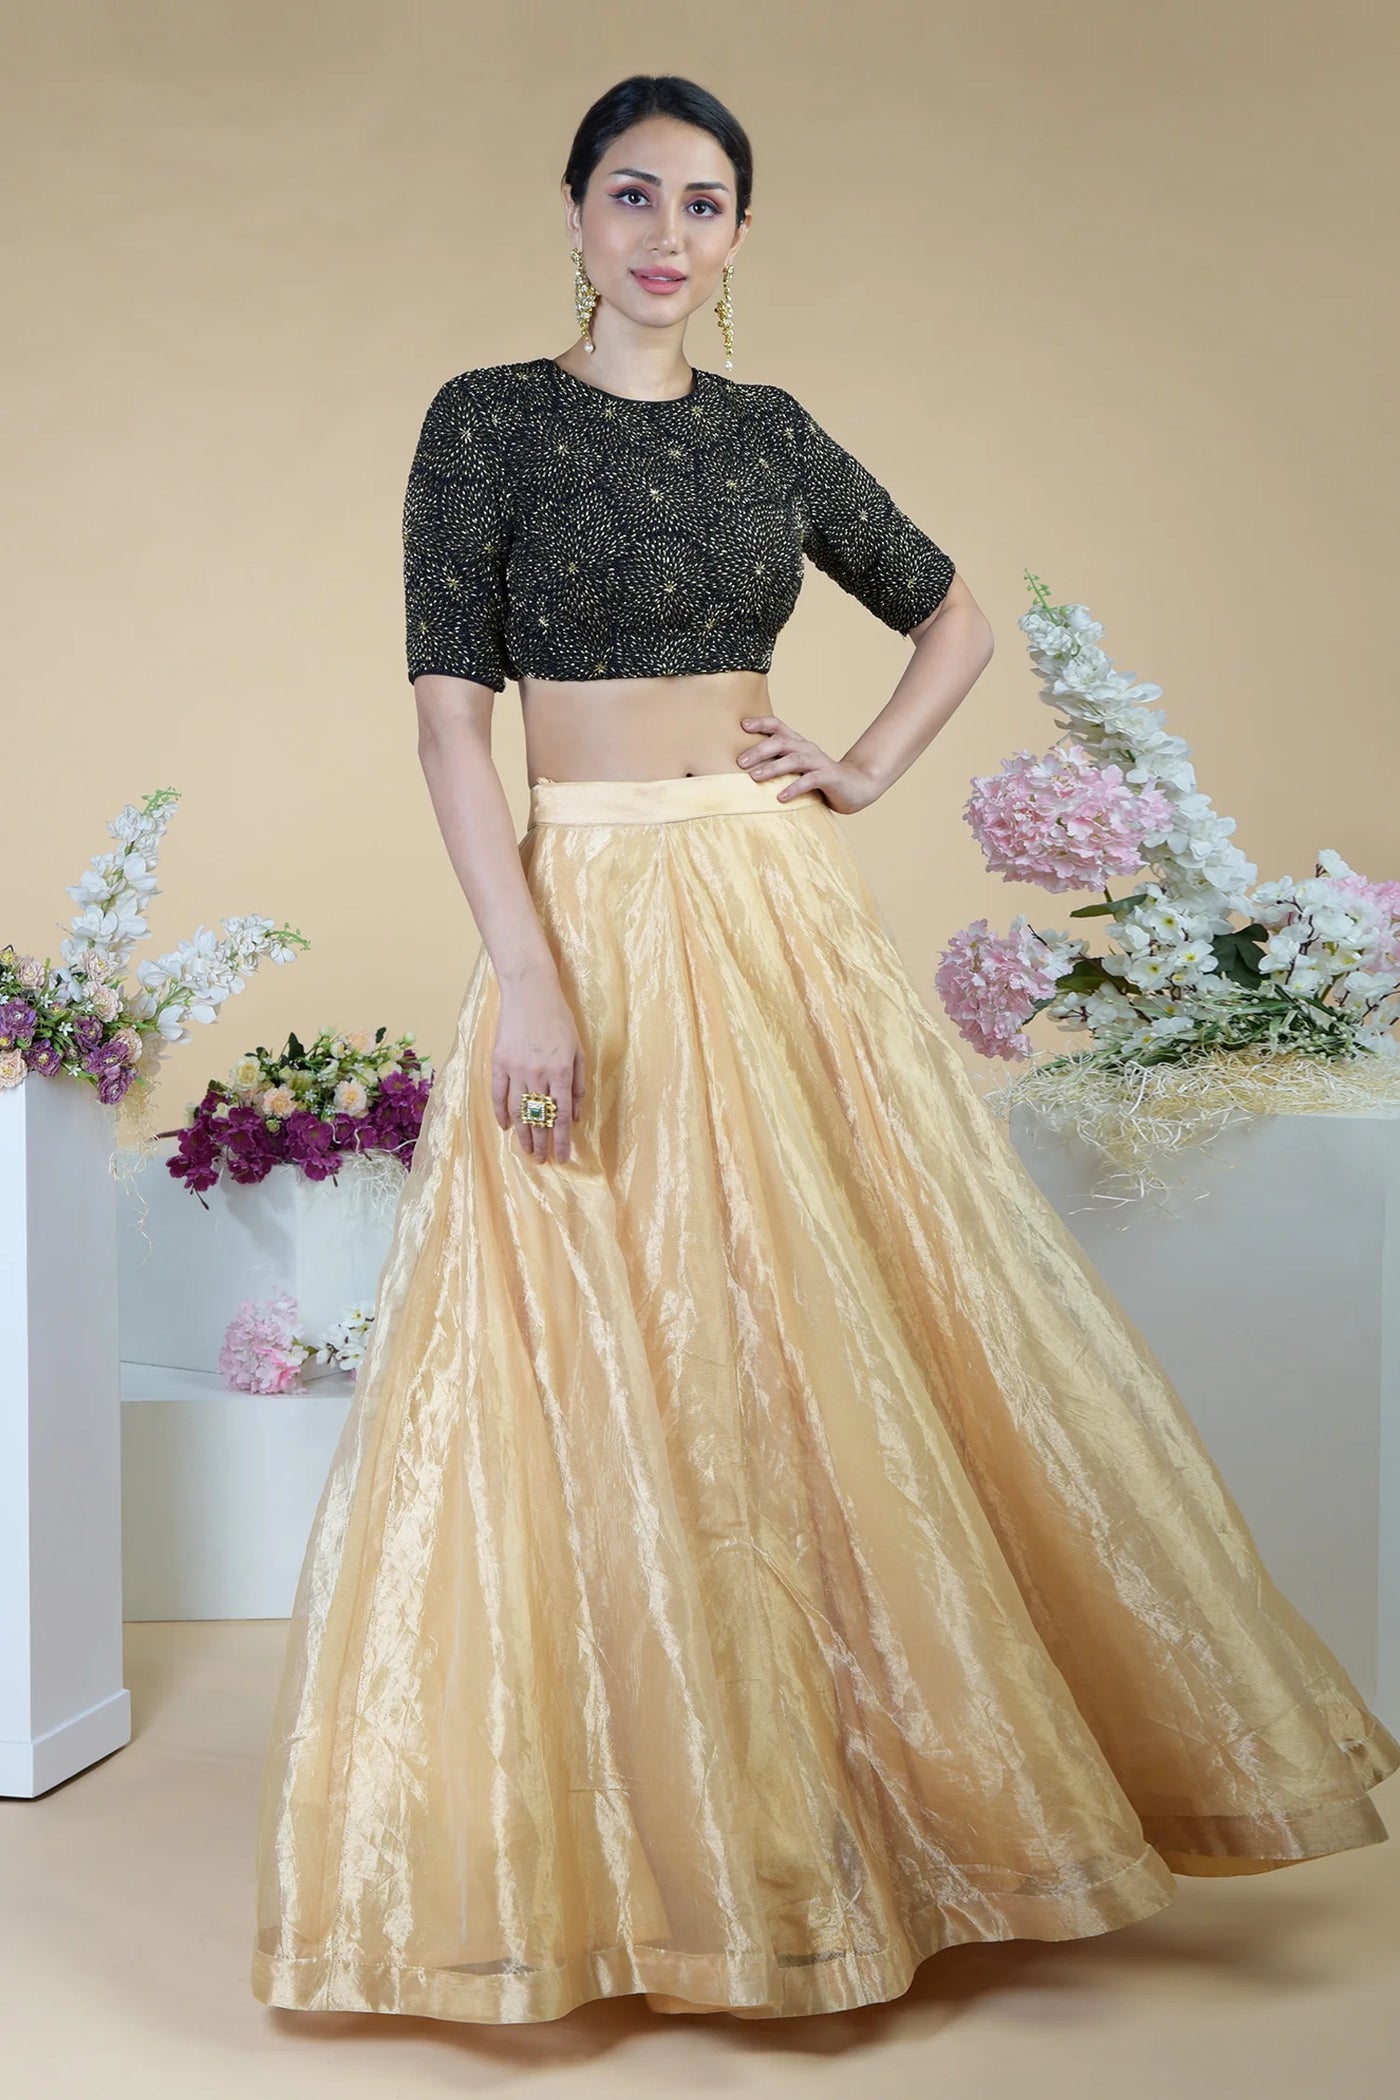 Black Tissue Lehenga Set - Indian Clothing in Denver, CO, Aurora, CO, Boulder, CO, Fort Collins, CO, Colorado Springs, CO, Parker, CO, Highlands Ranch, CO, Cherry Creek, CO, Centennial, CO, and Longmont, CO. Nationwide shipping USA - India Fashion X